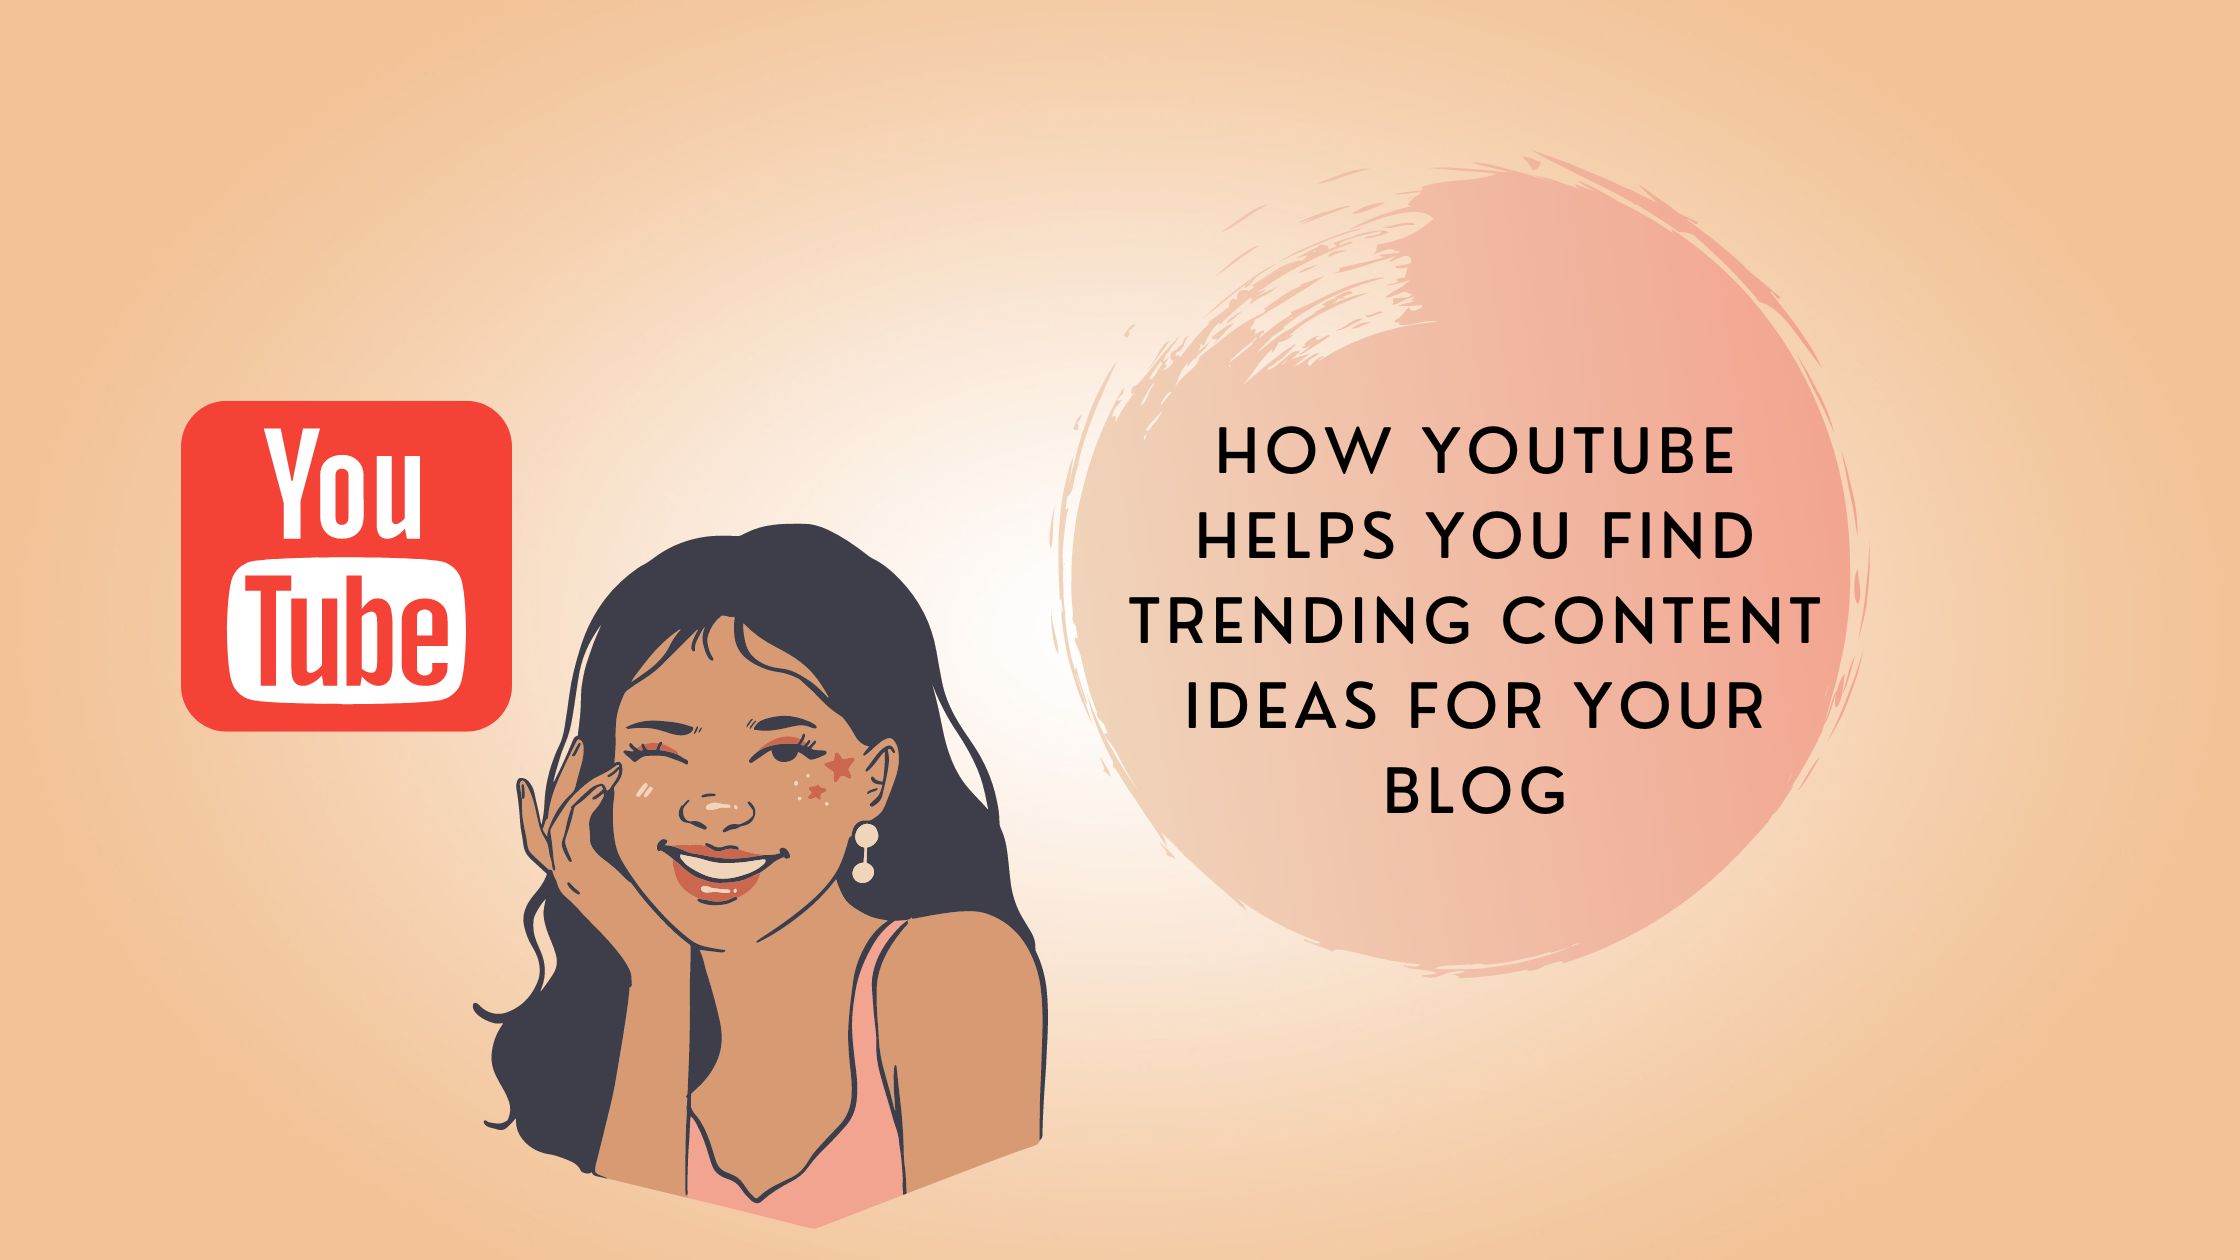 How YouTube helps you find trending content ideas for your blog